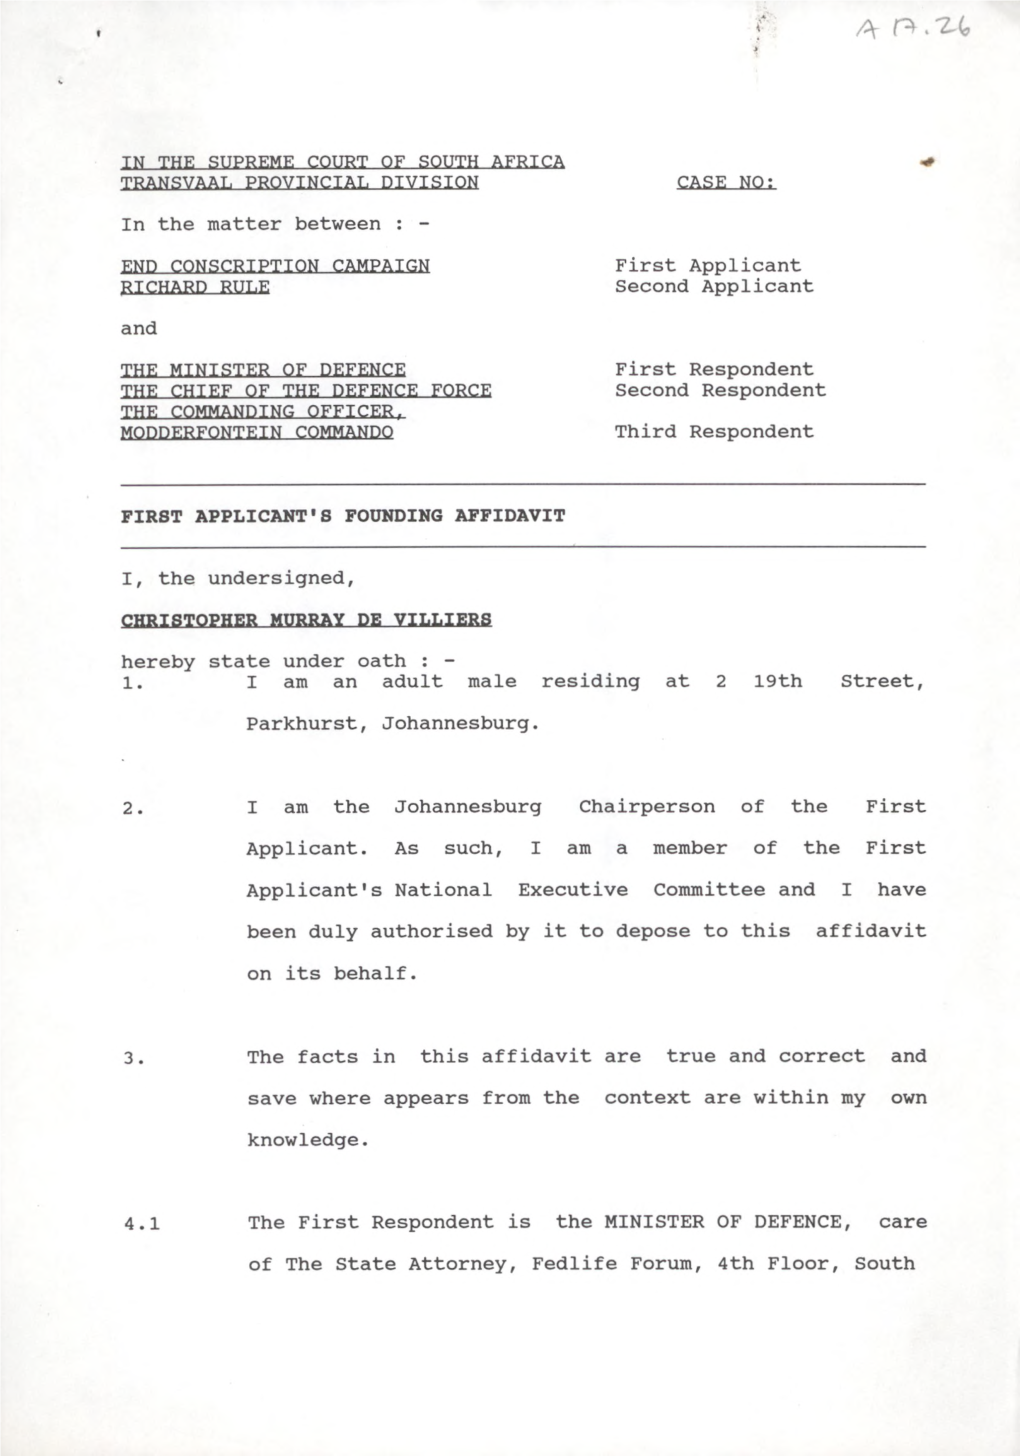 IN the SUPREME COURT of SOUTH AFRICA TRANSVAAL PROVINCIAL DIVISION CASE NO; in the Matter Between